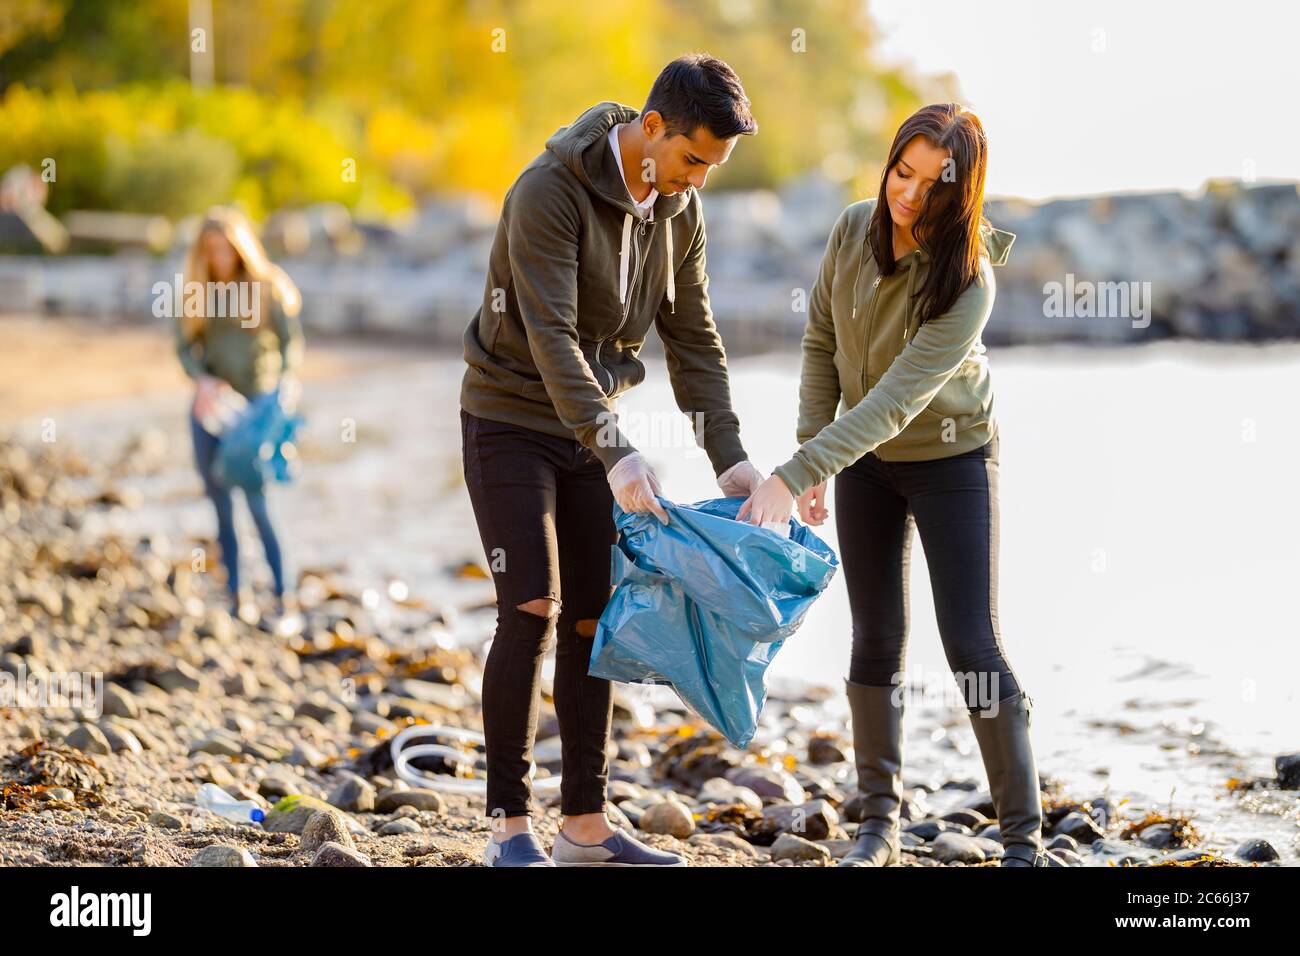 Team of environmental conservation volunteers cleaning beach on sunny day Stock Photo